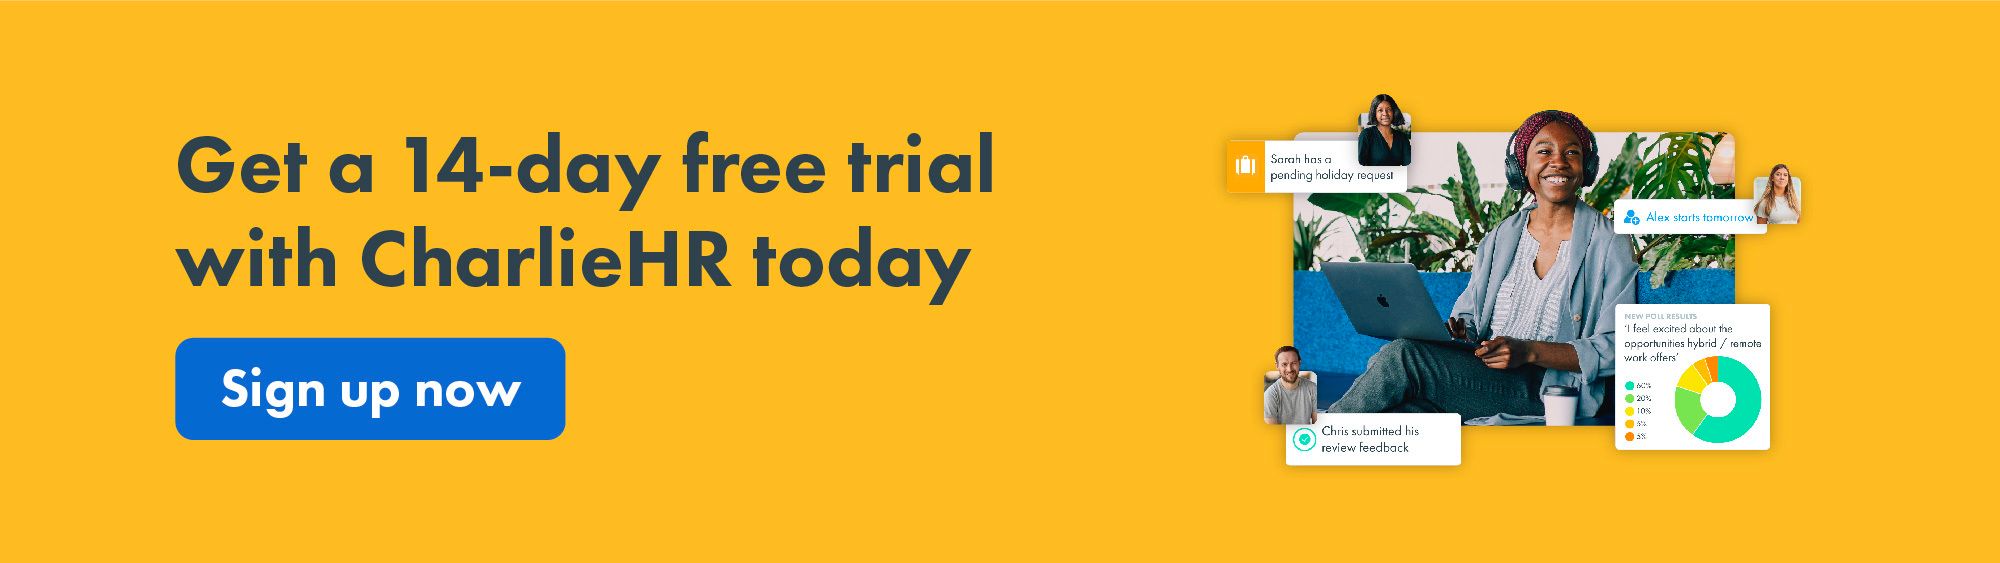 Click here to enjoy a free 14-day trial with CharlieHR